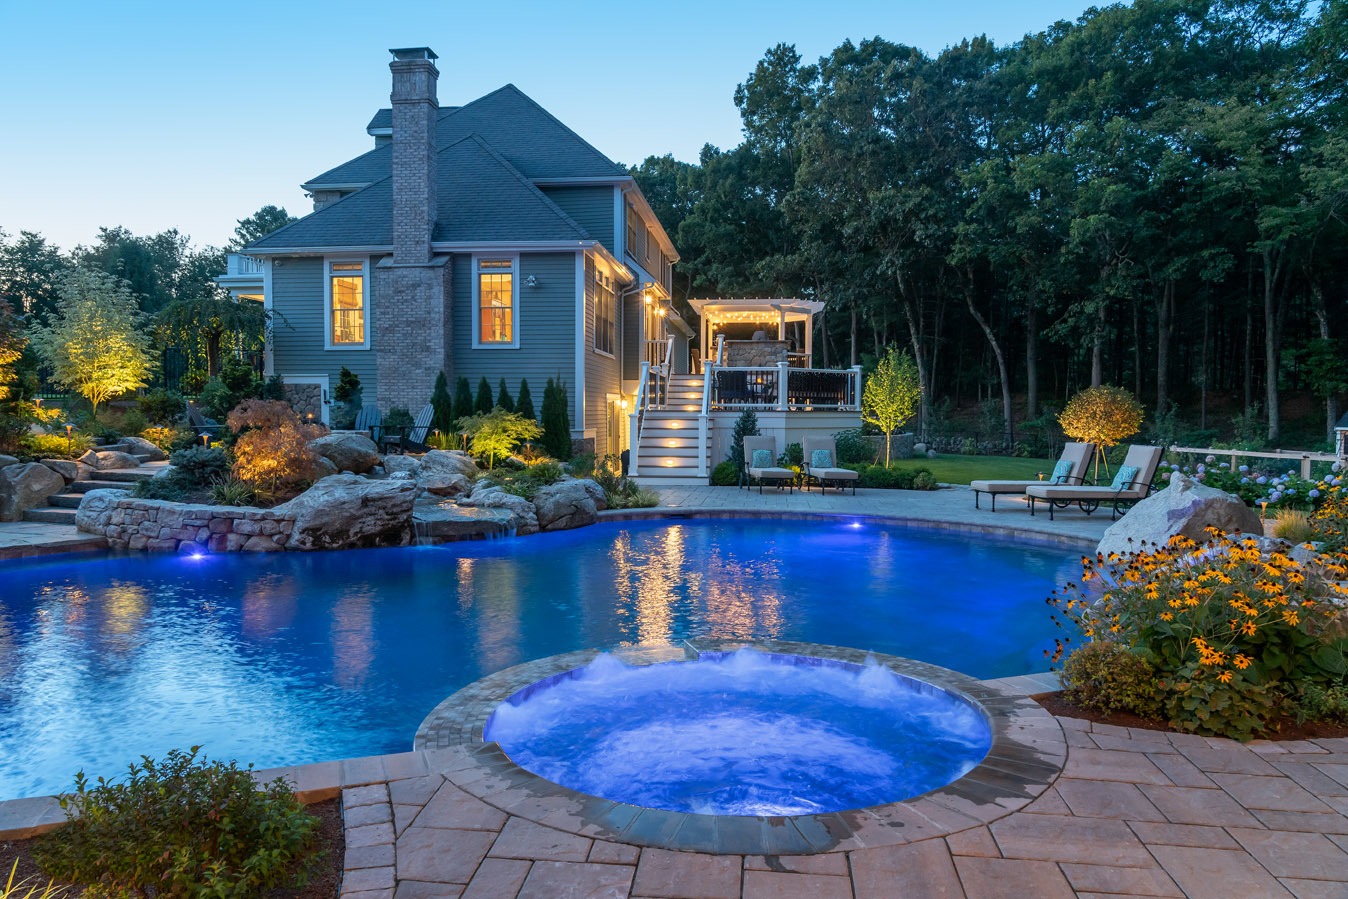 An illuminated backyard with an in-ground pool and hot tub at dusk. A luxurious house, landscaped garden, and outdoor furniture are visible.